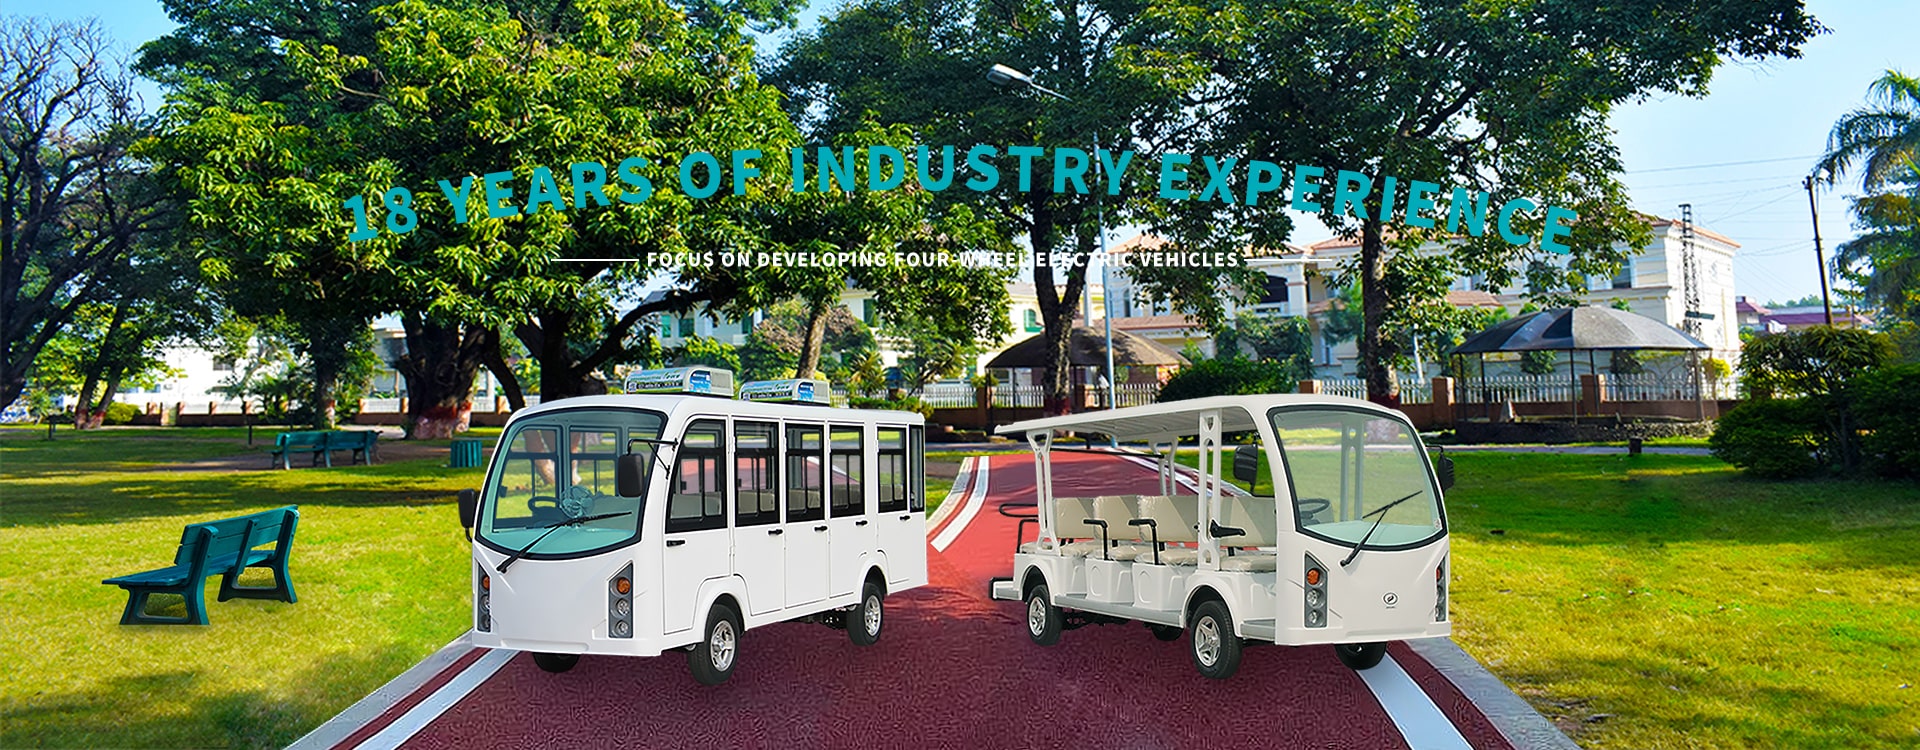 electric shuttle bus with 18 years of industry experience